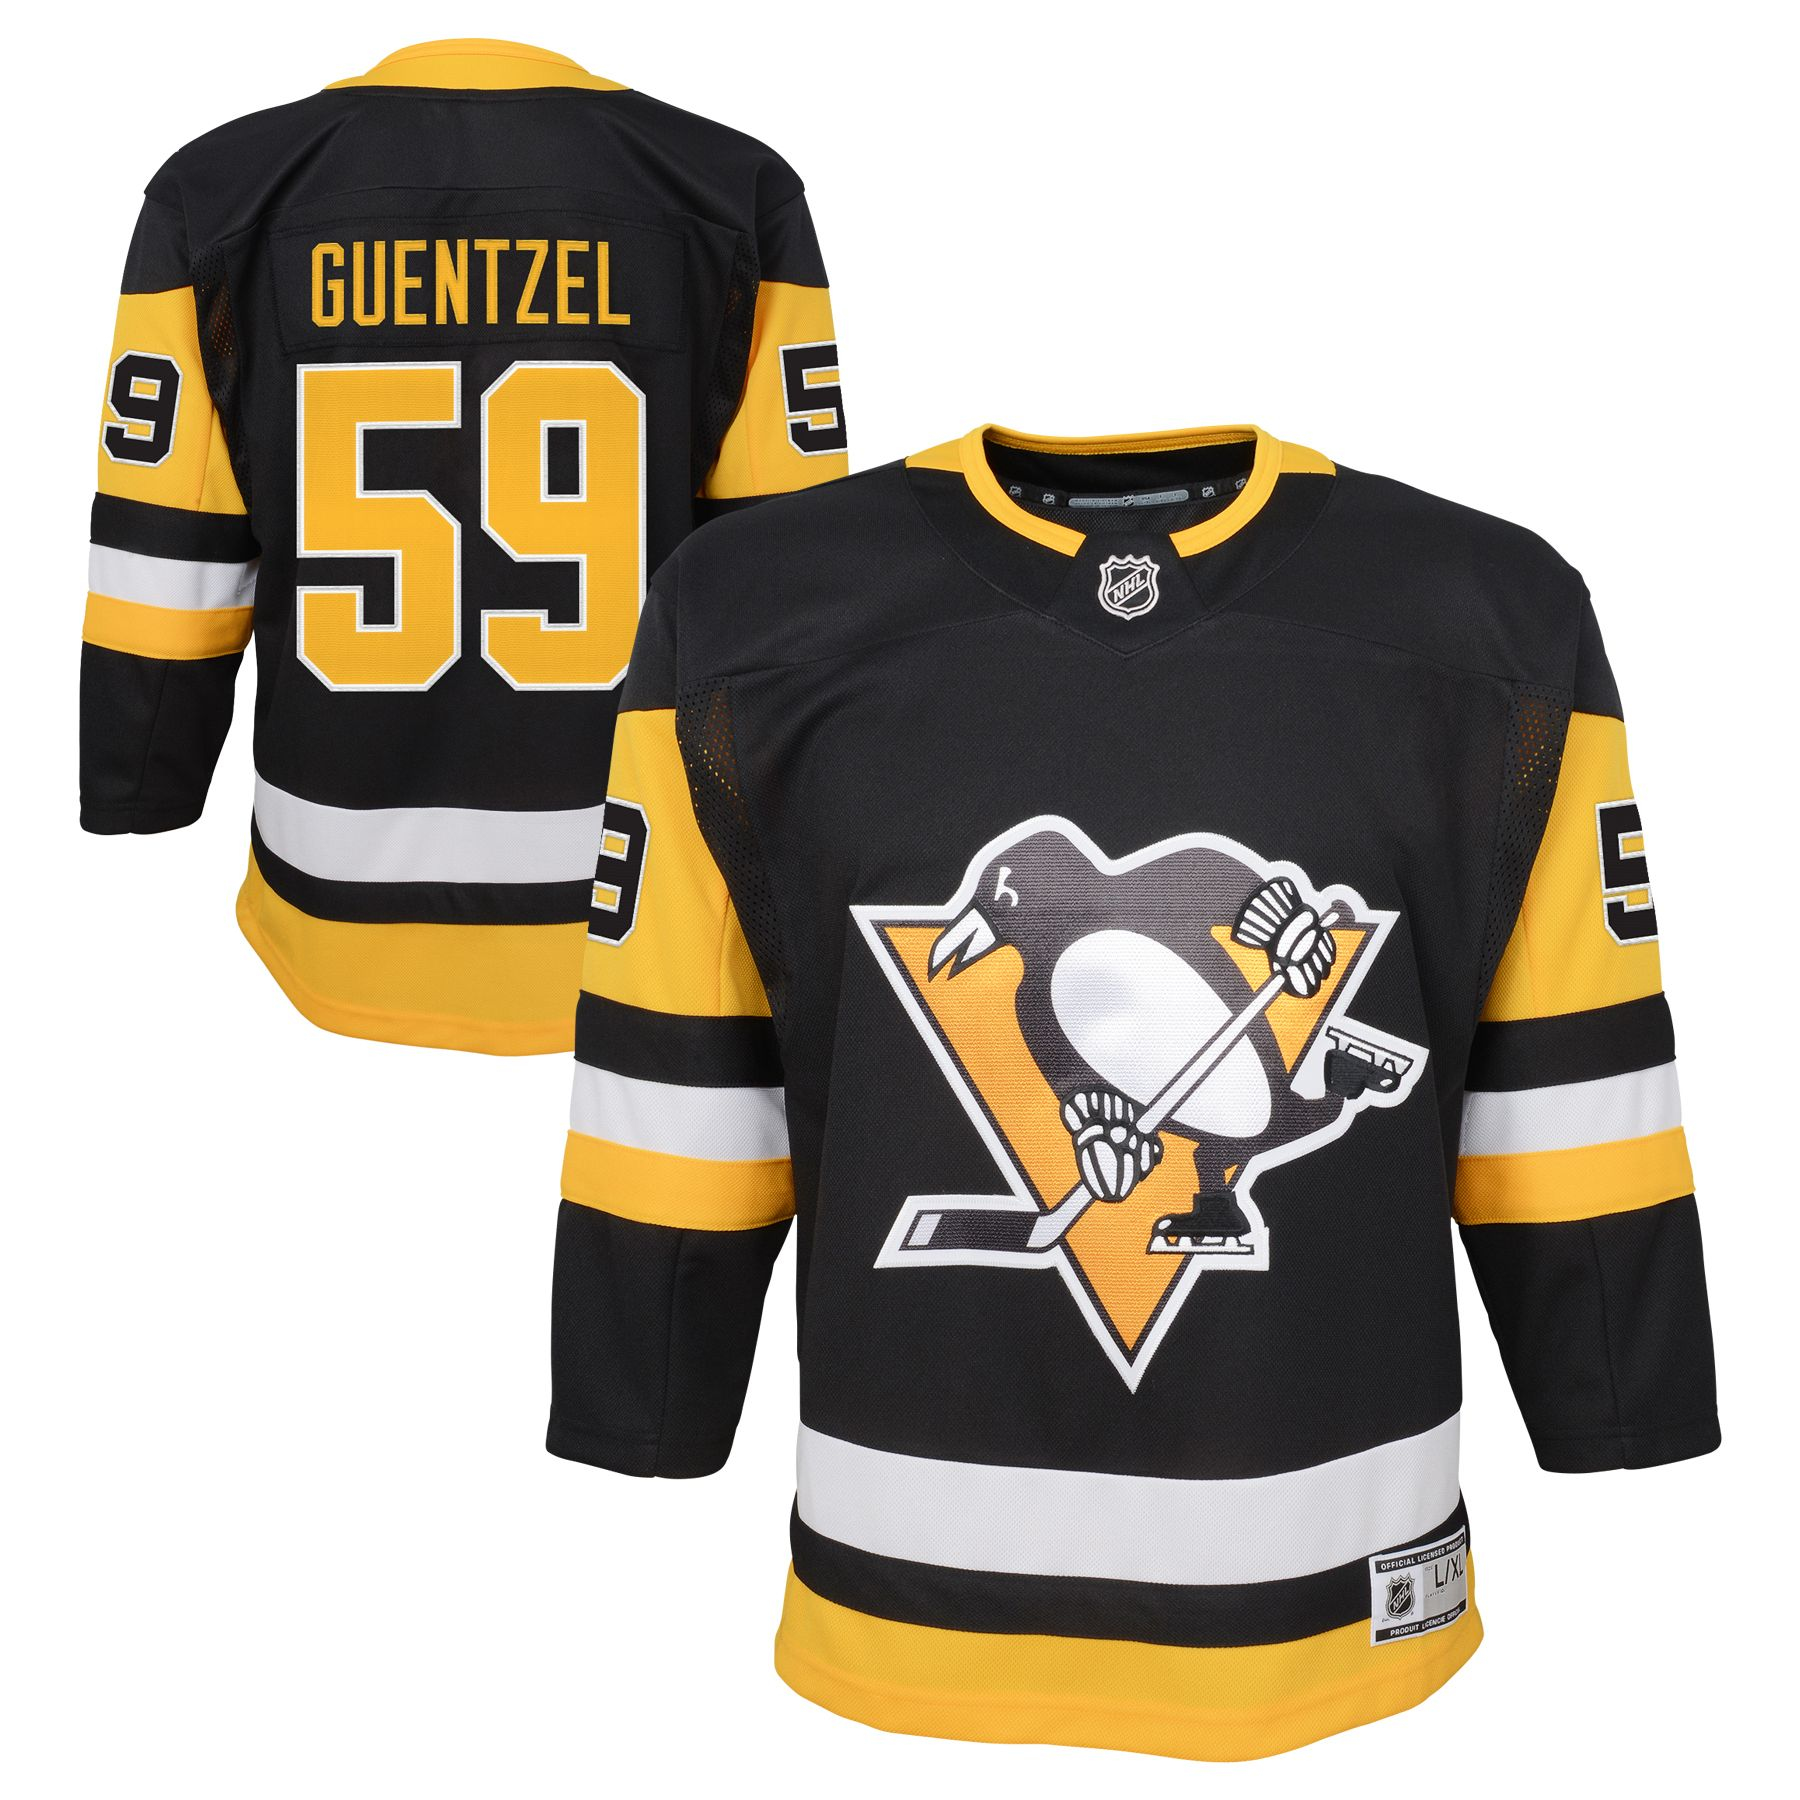 NHL Youth Pittsburgh Penguins Jake Guentzel #59 Premier Home Jersey, Boys', Small/Medium, Team